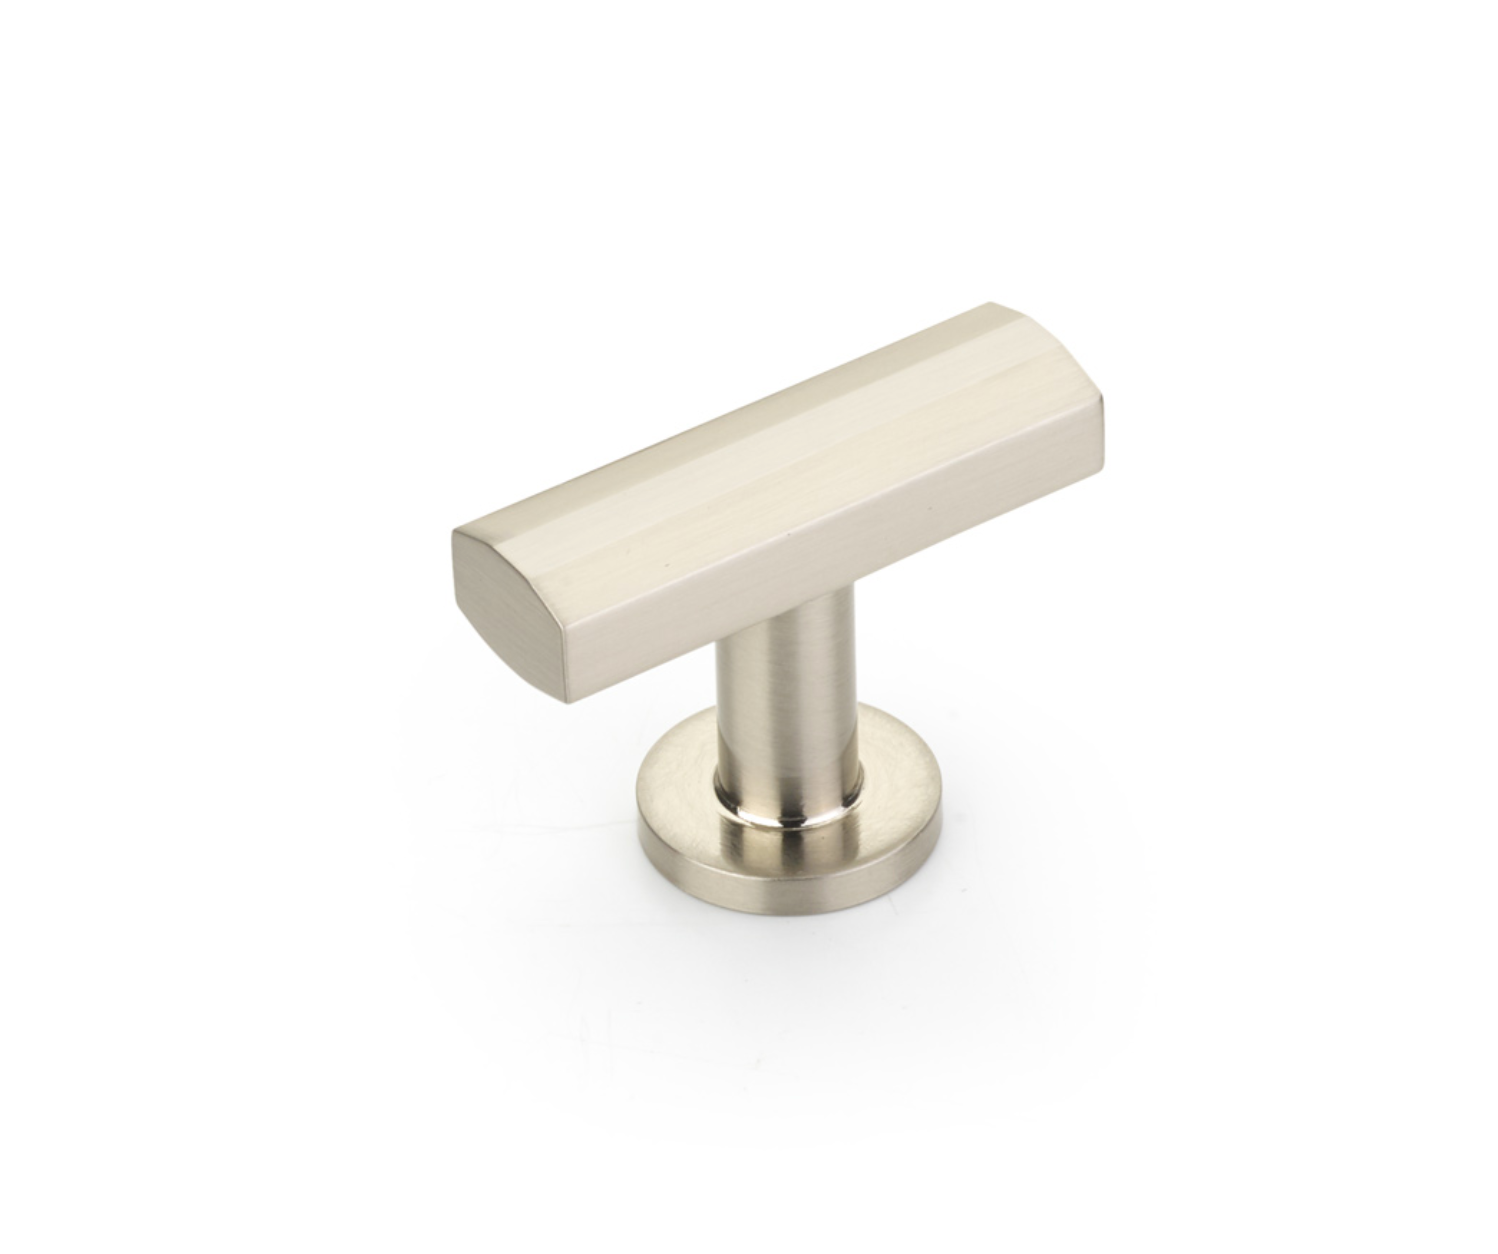 Brushed Nickel "Heather" T-Bar Cabinet Knobs and Drawer Pulls